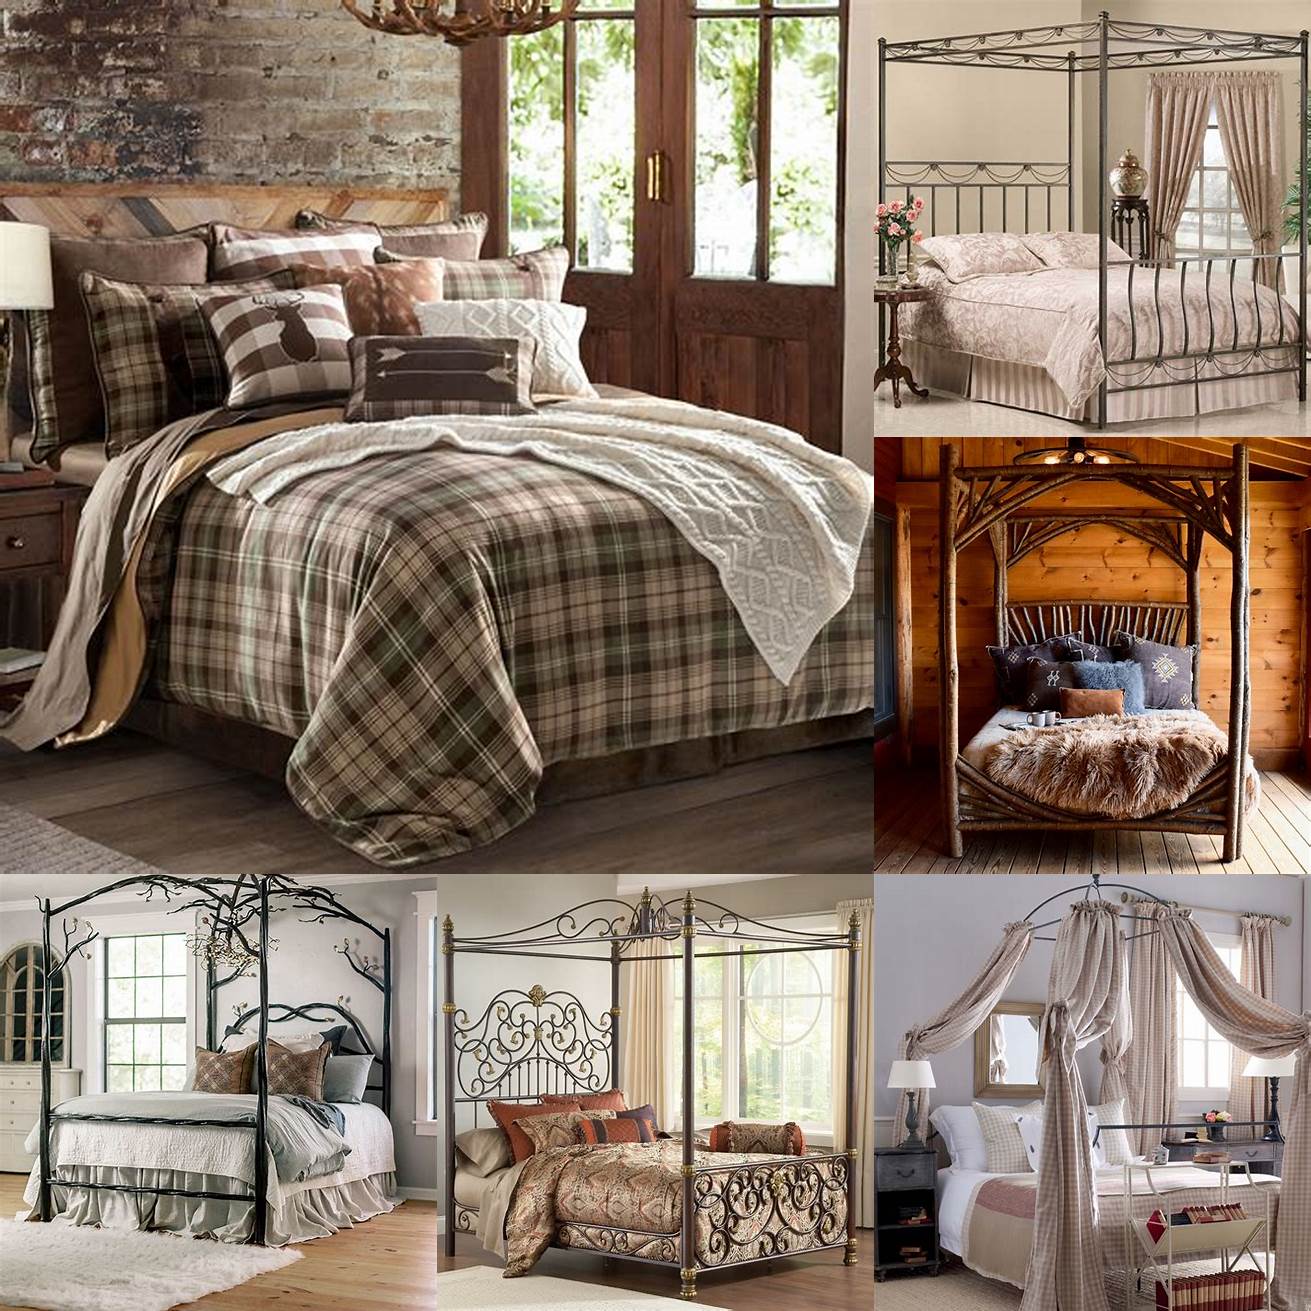 Rustic metal canopy bed with plaid bedding